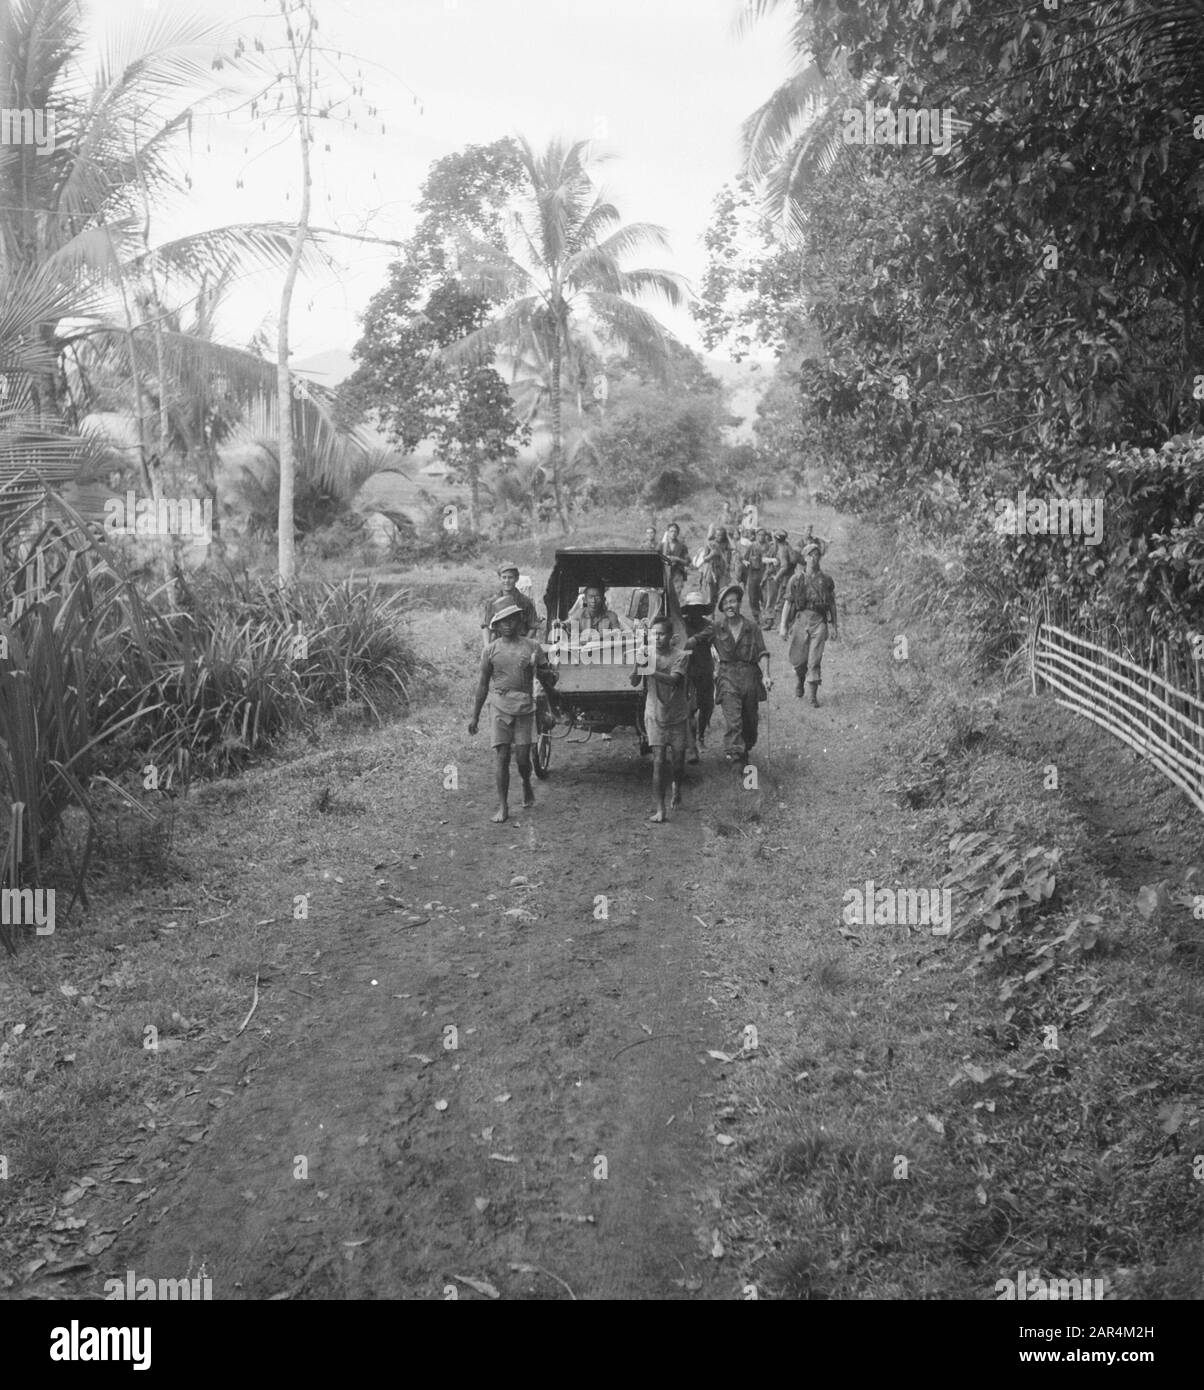 A patrol runs behind a dokar pulled by two men. Inside the cart are an old man and woman Date: September 1947 Location: Indonesia, Dutch East Indies Stock Photo